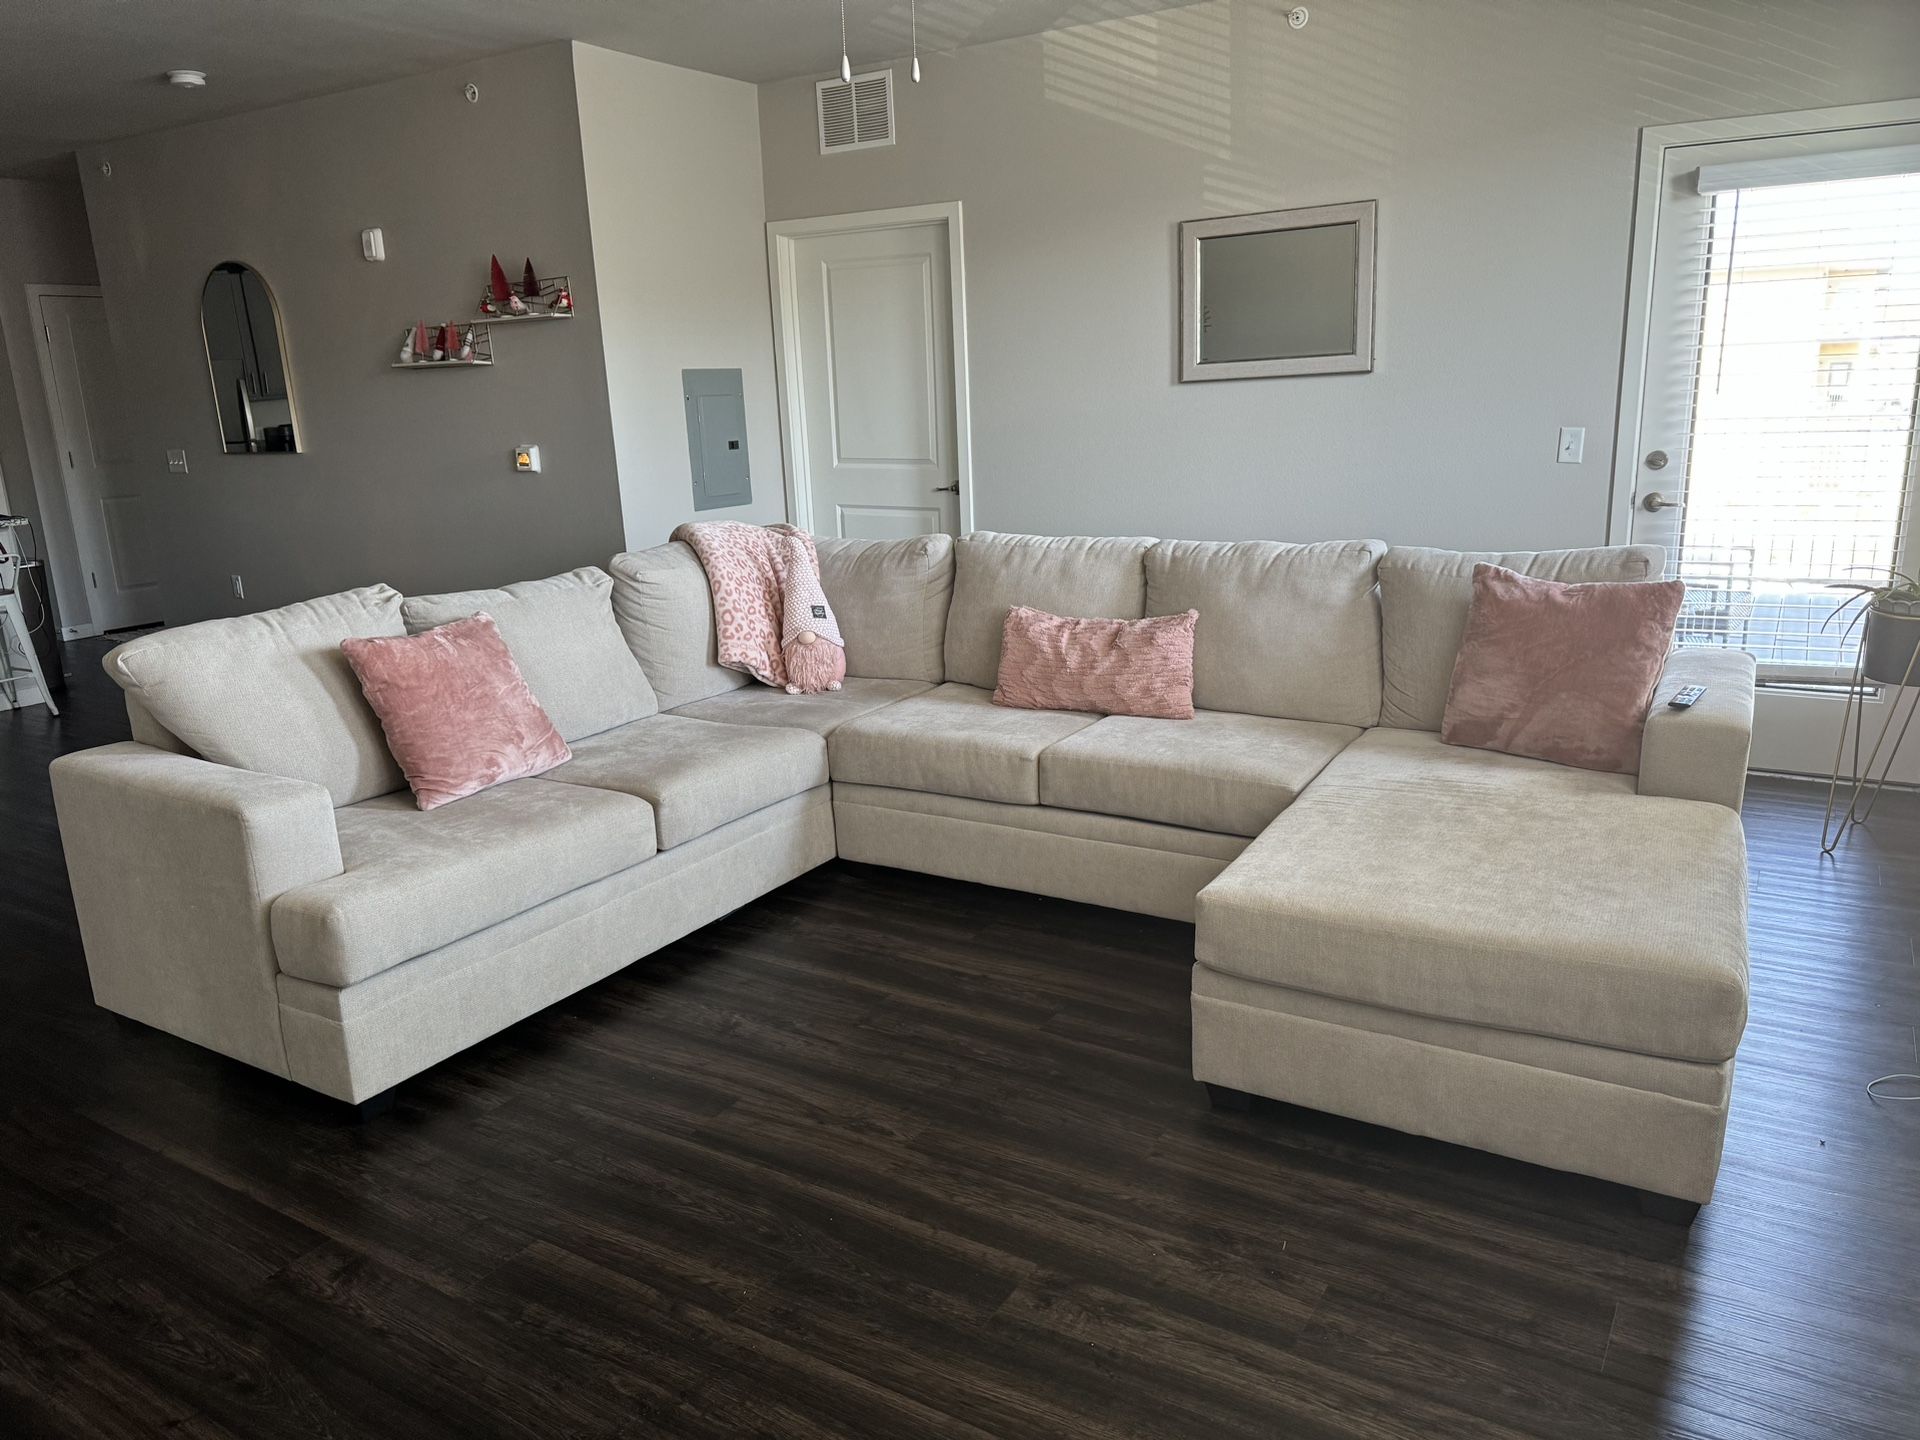 Sand Color Sectional Like New For Sale 